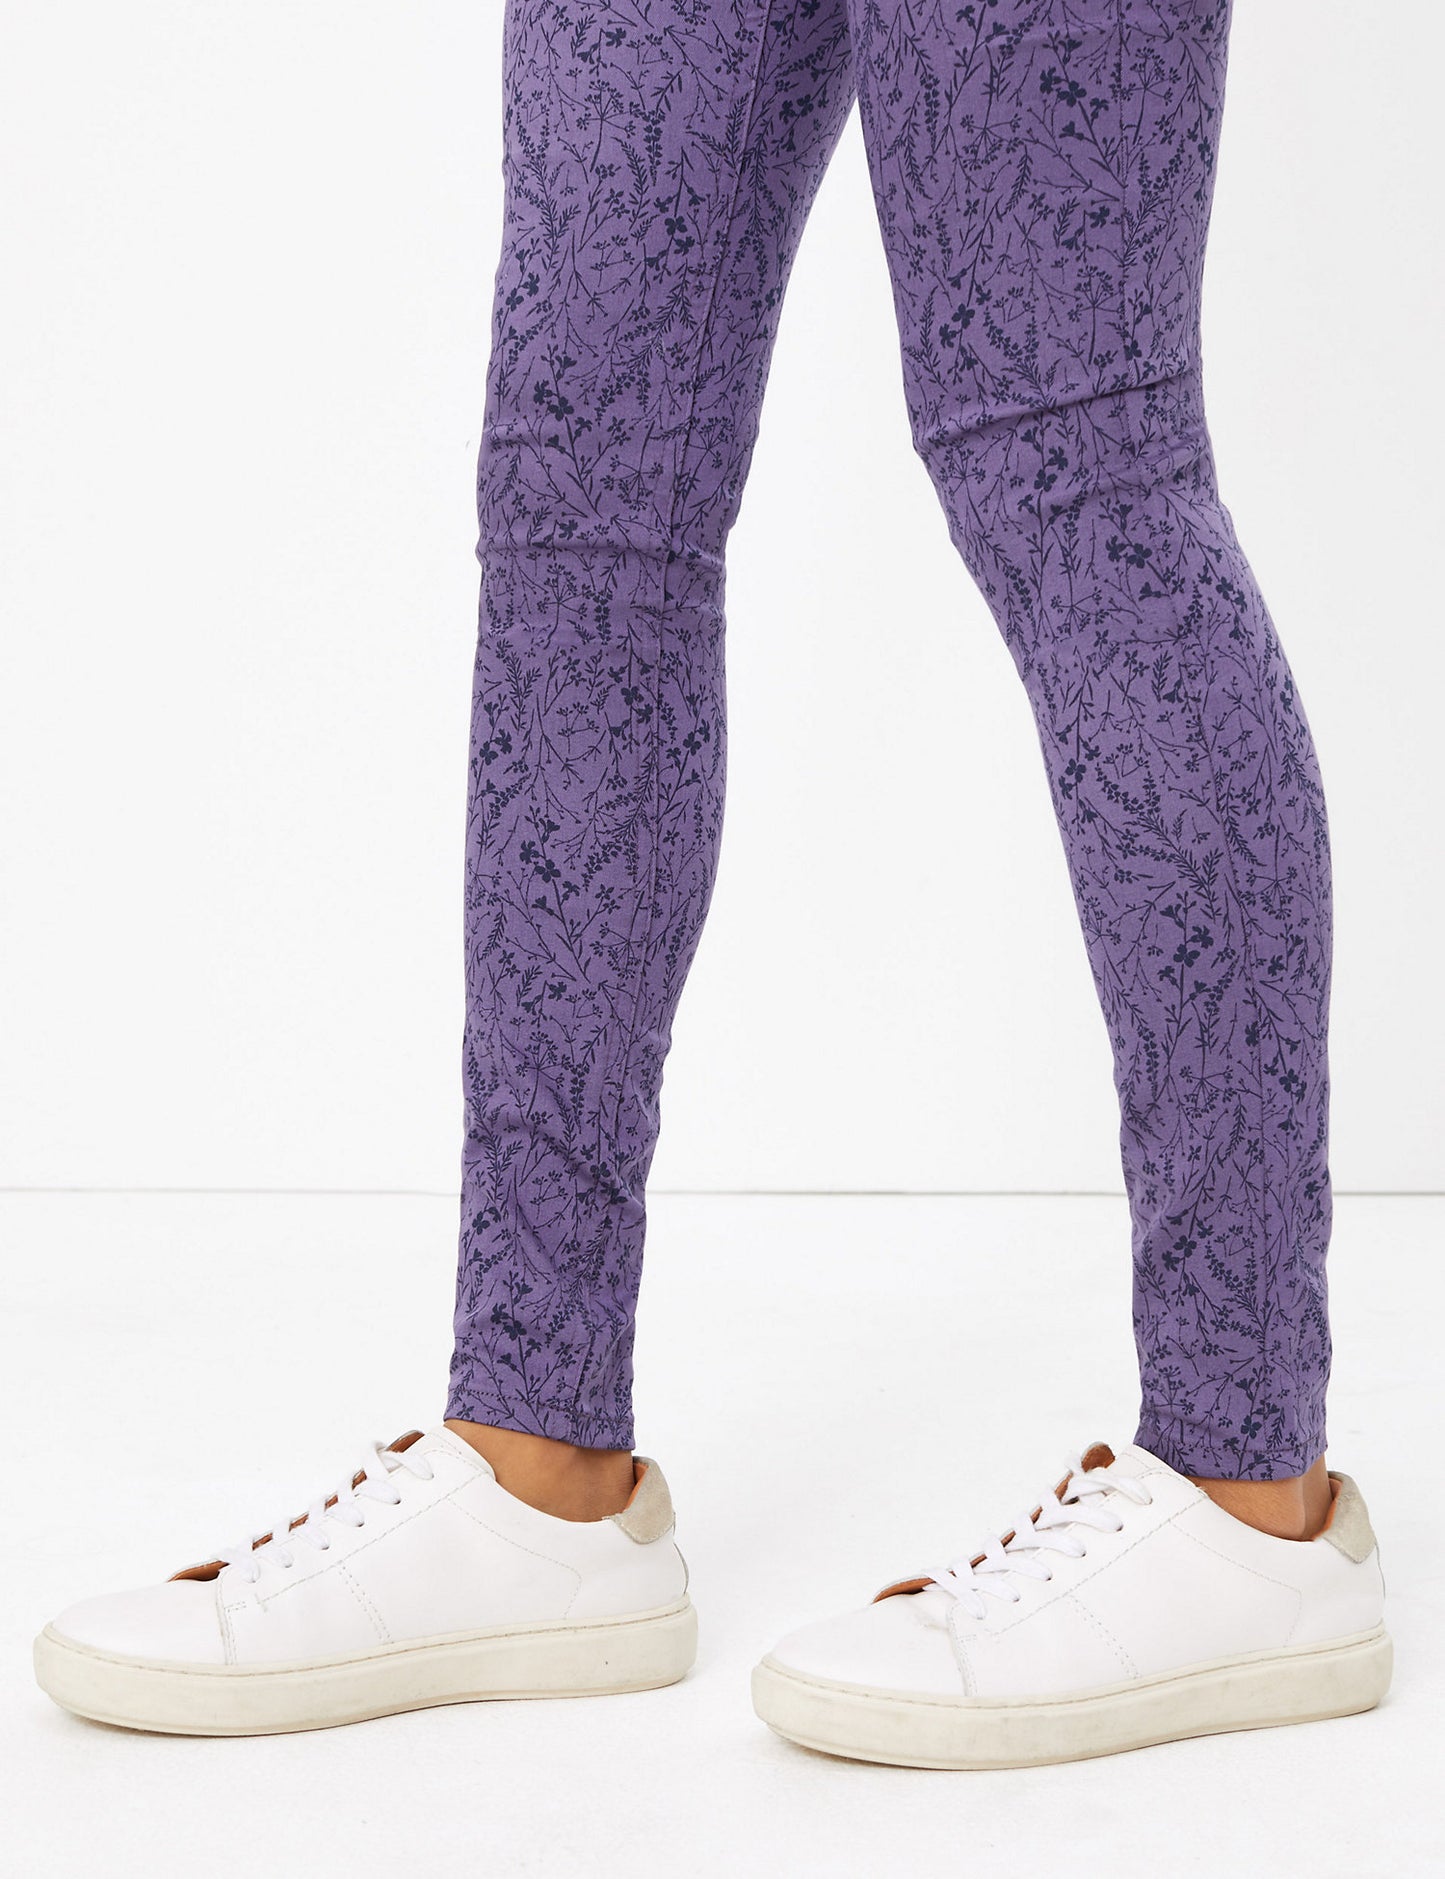 Famous Store Printed High Waisted Jegging